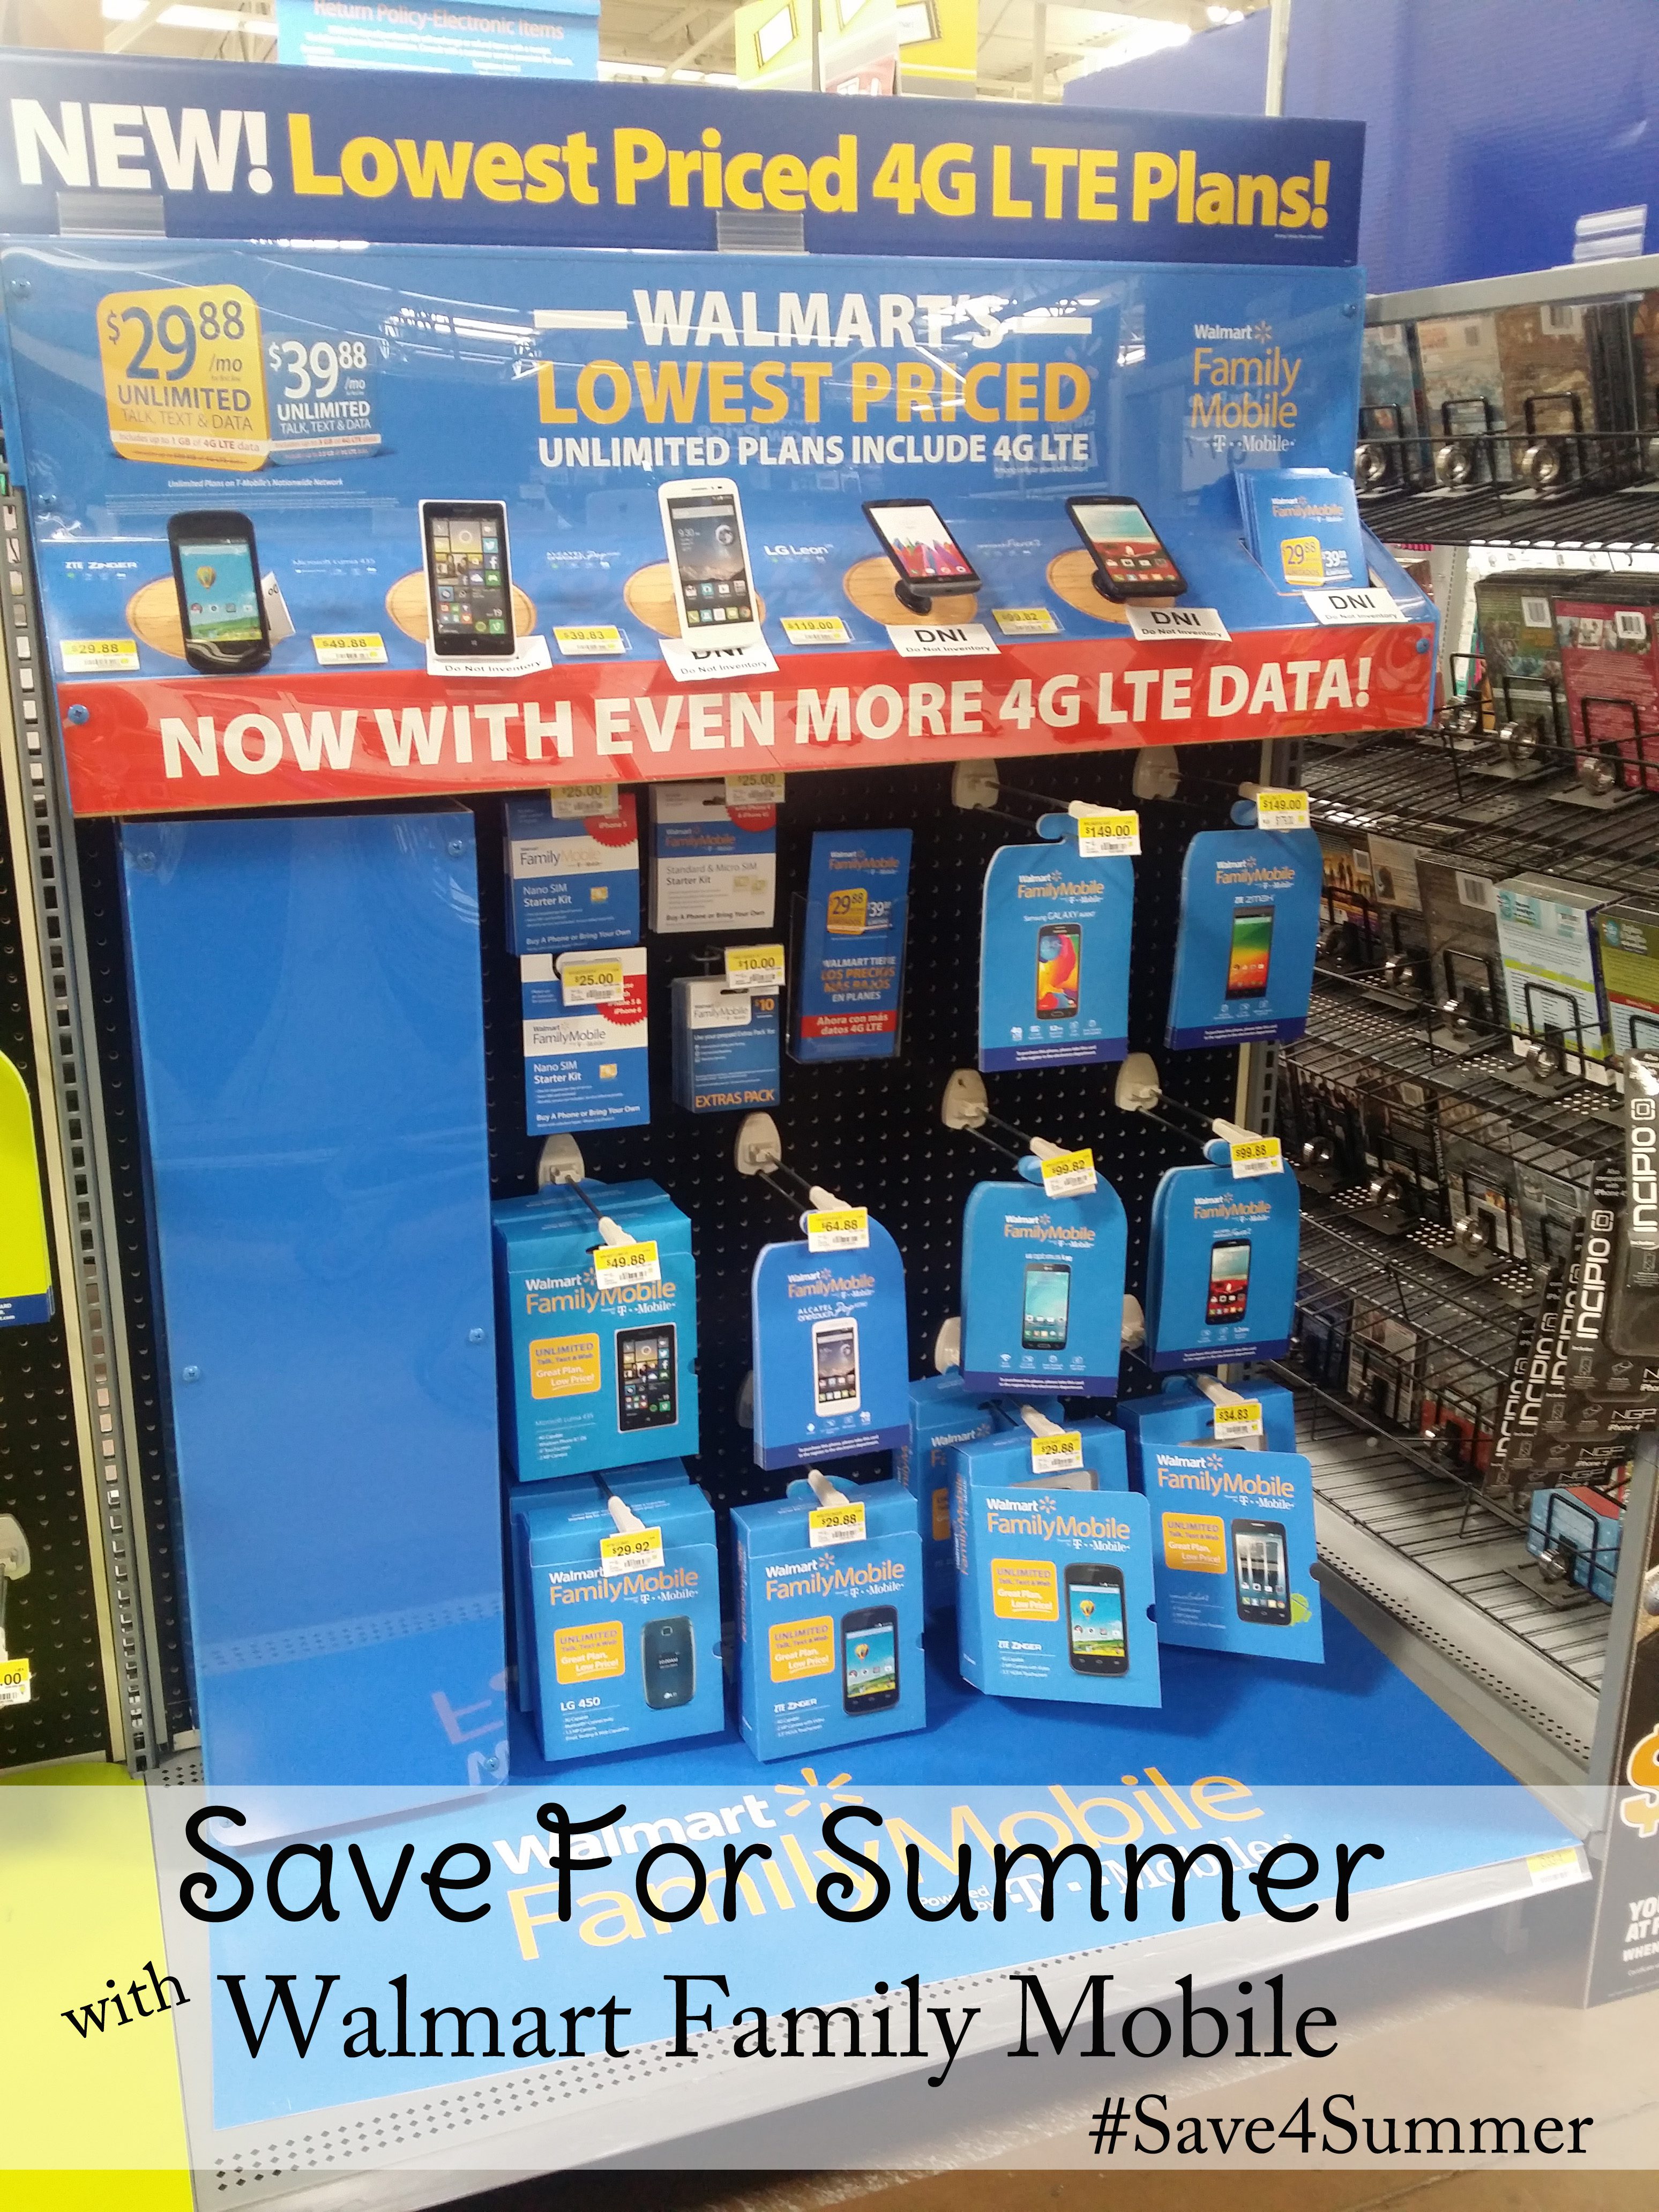 Get Unlimited Talk Text and Data/Web with Walmart Family Mobile #Save4Summer